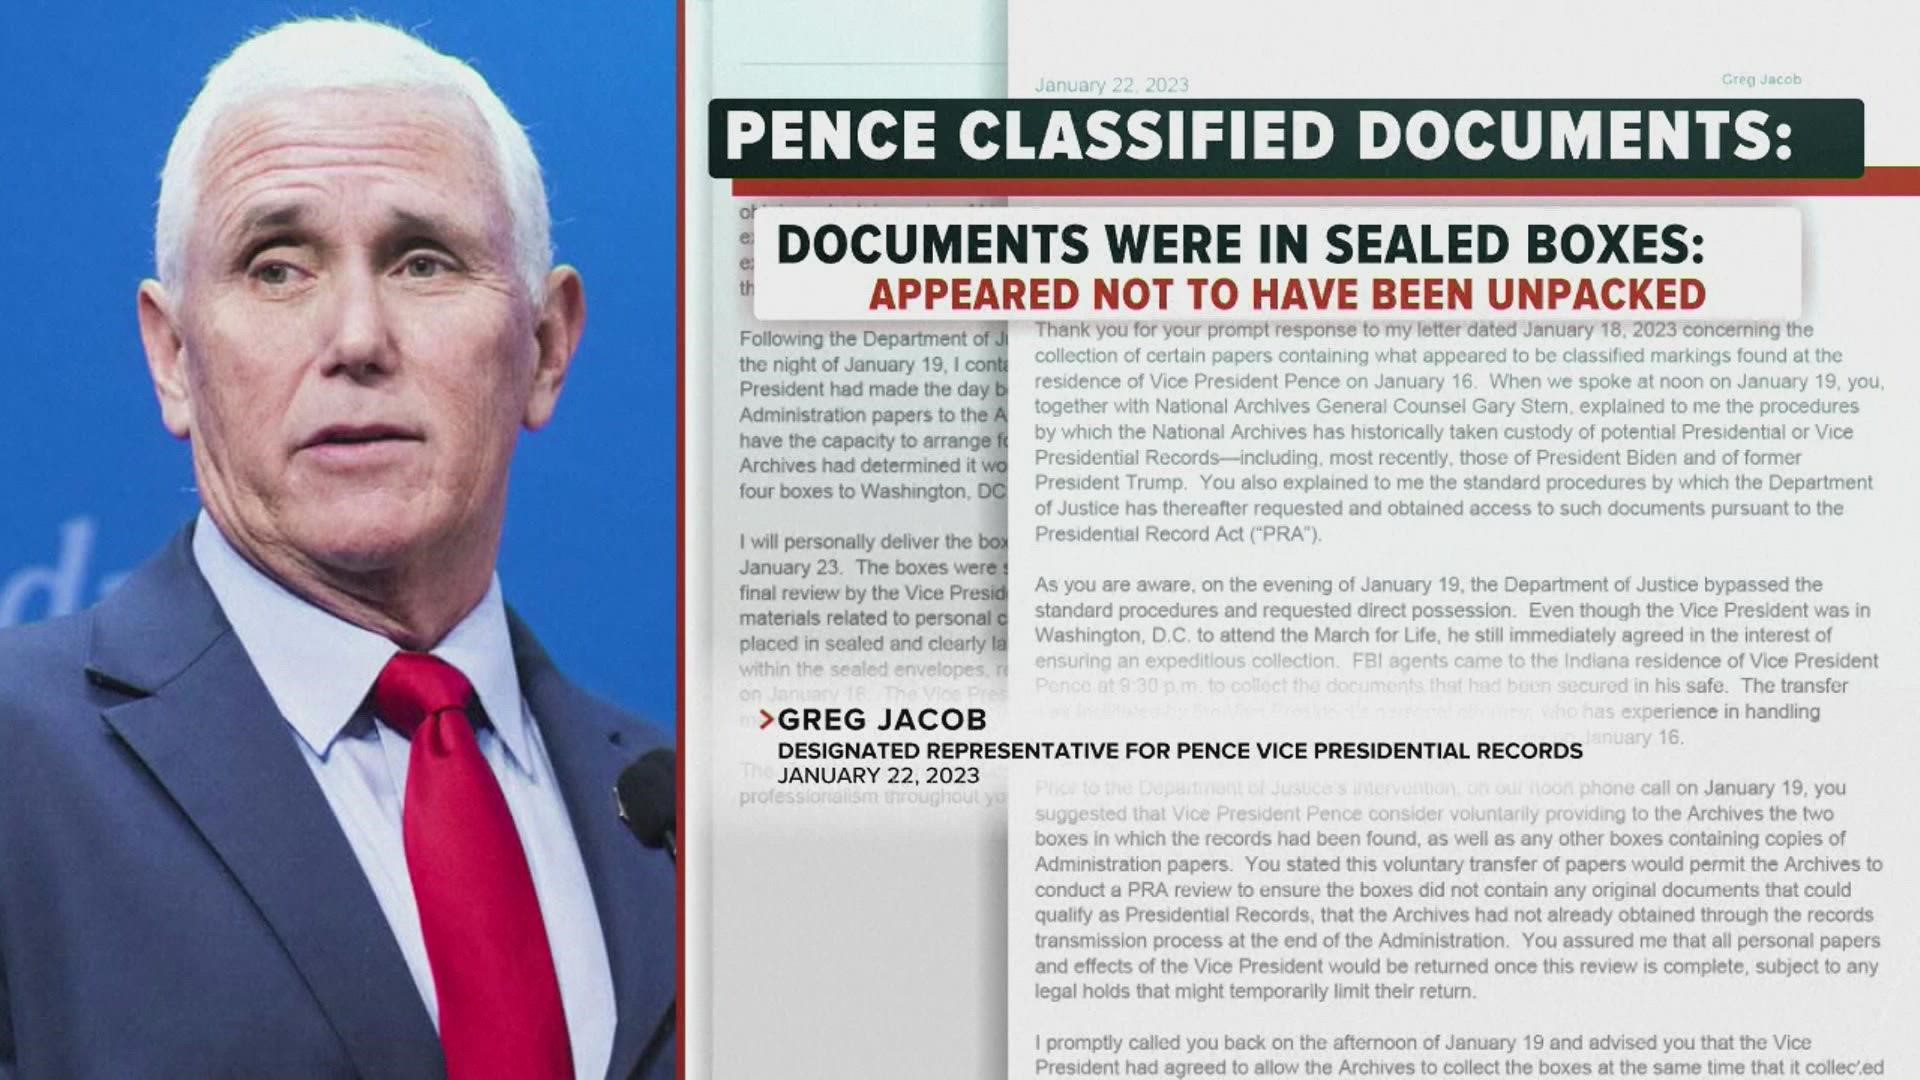 The former vice president was asked last year if he had retained any classified information upon leaving office and said, “No, not to my knowledge.”